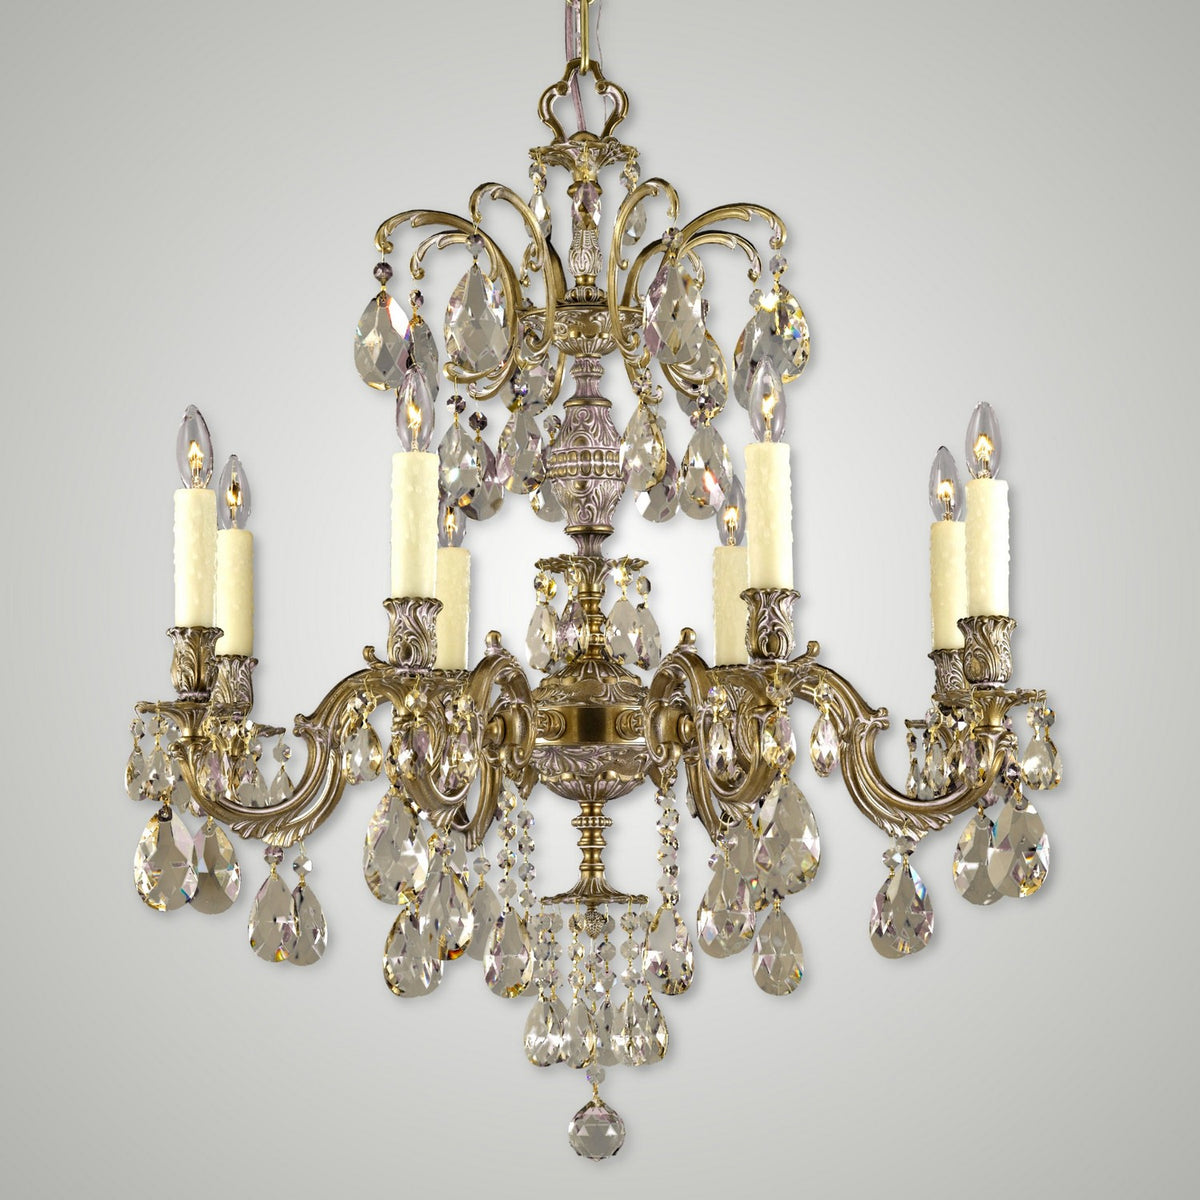 Marlena Brass and Golden Colored Crystal Chandelier